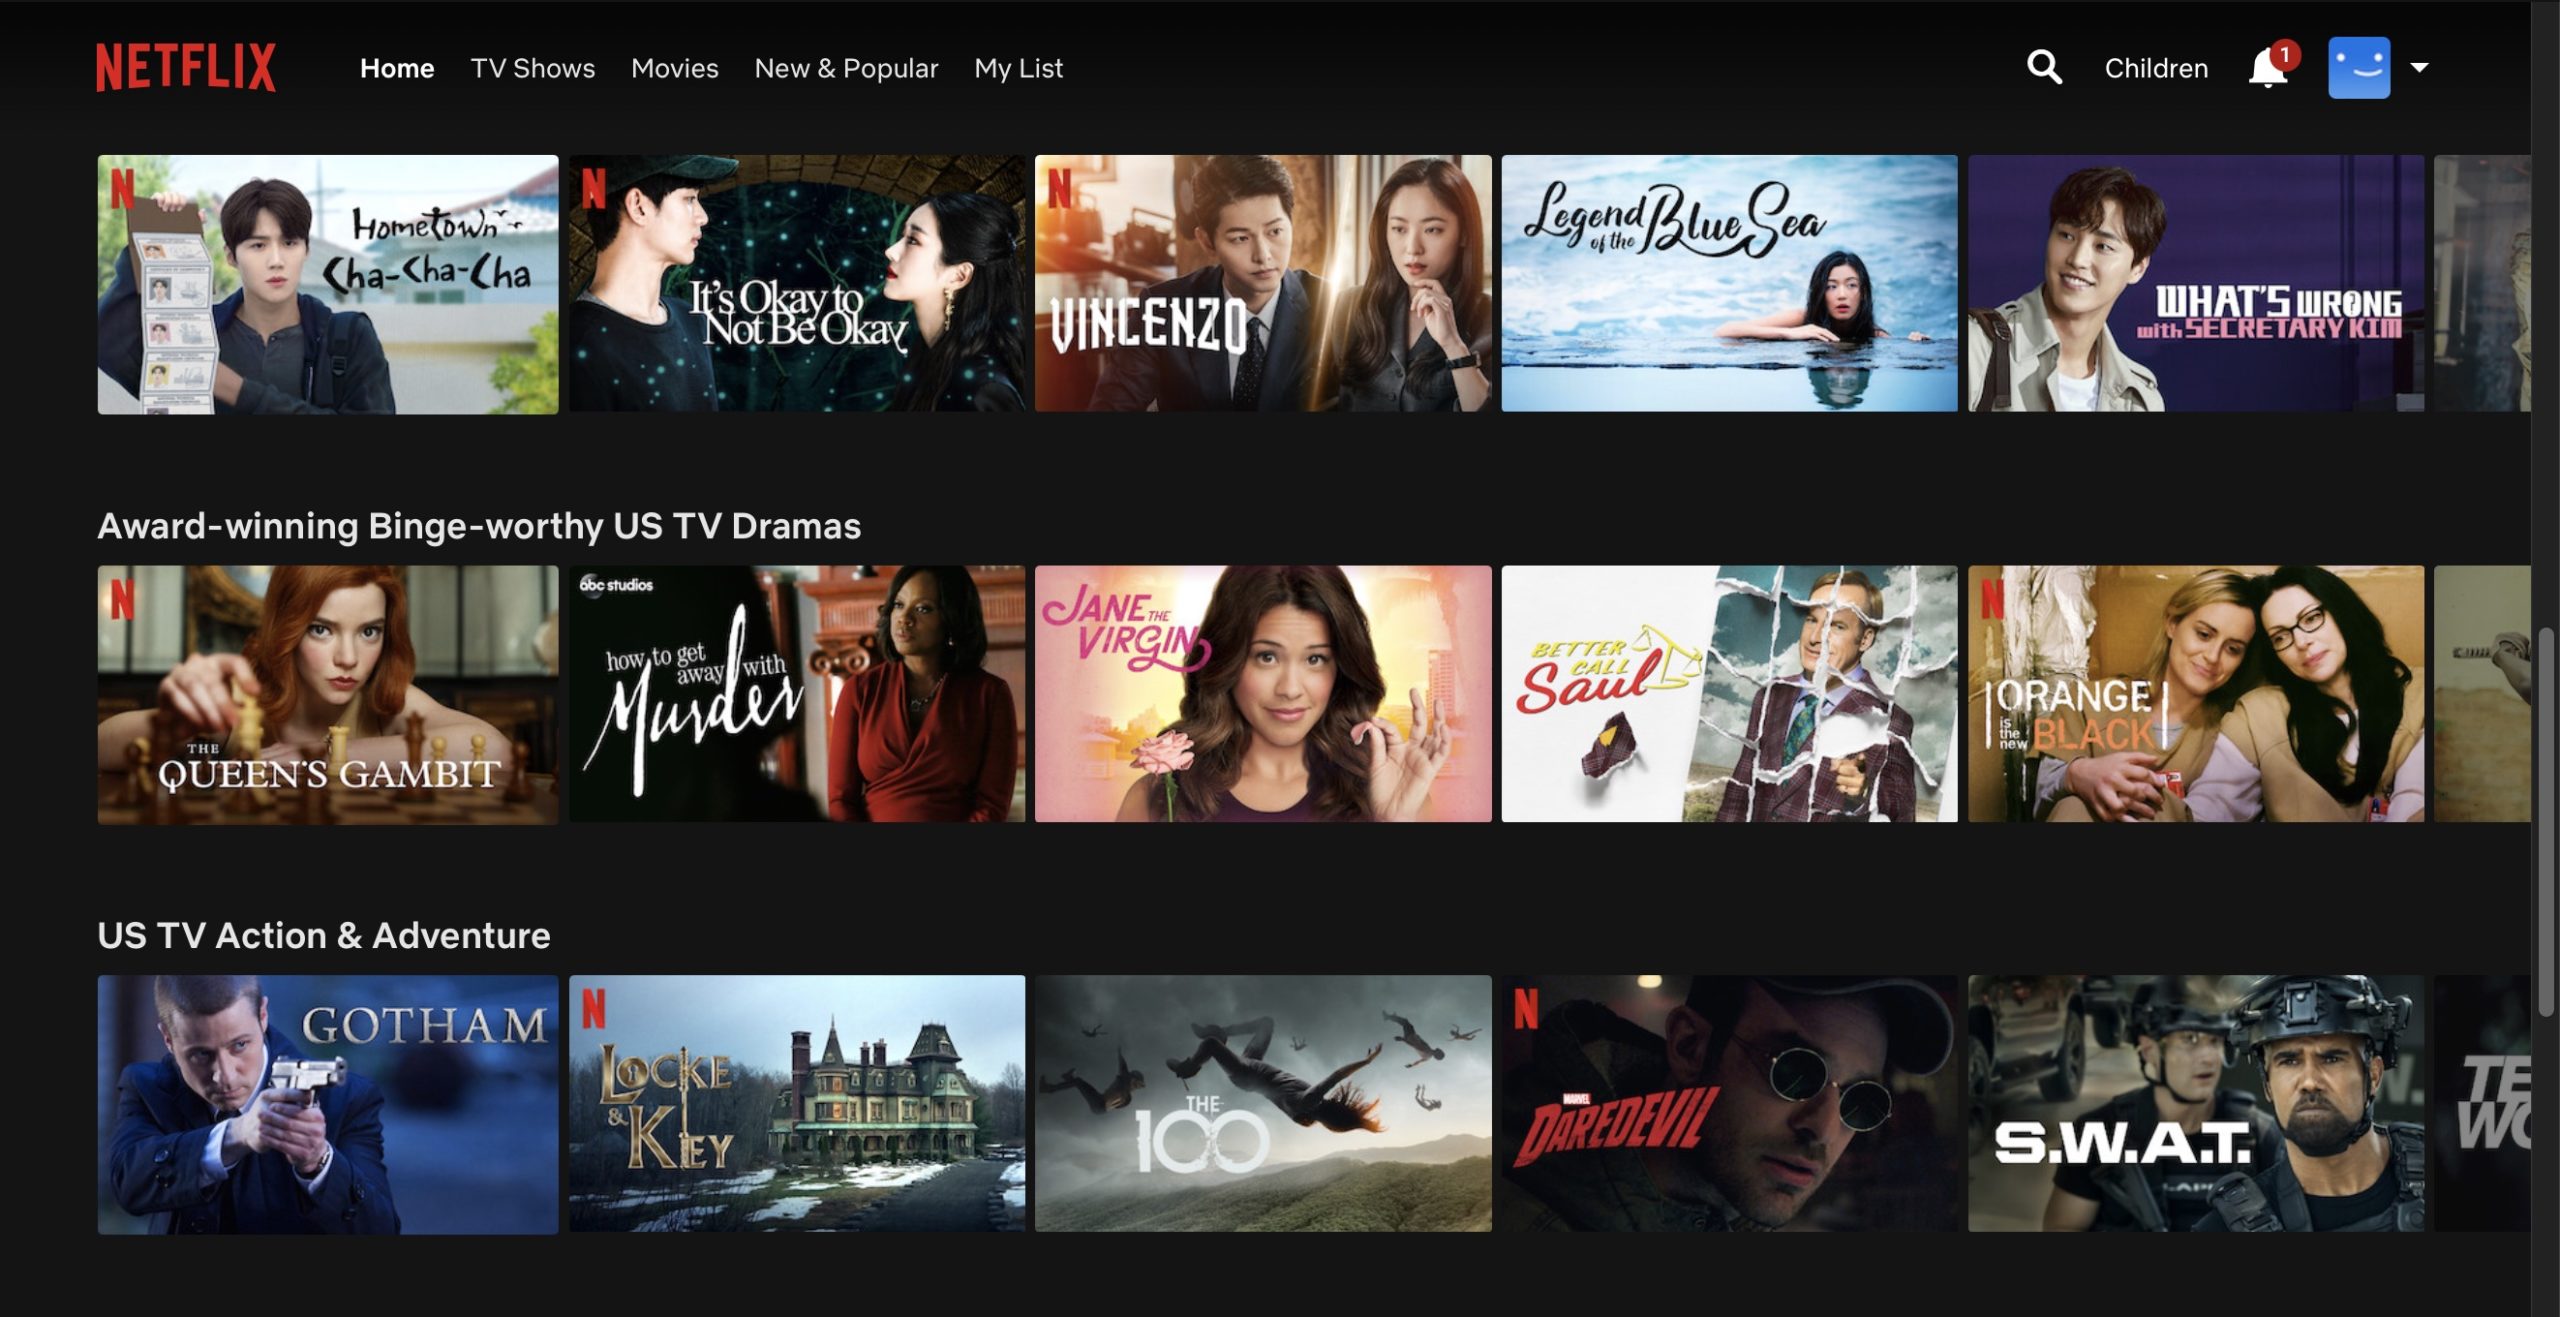 Here's are the different ways you can watch Netflix